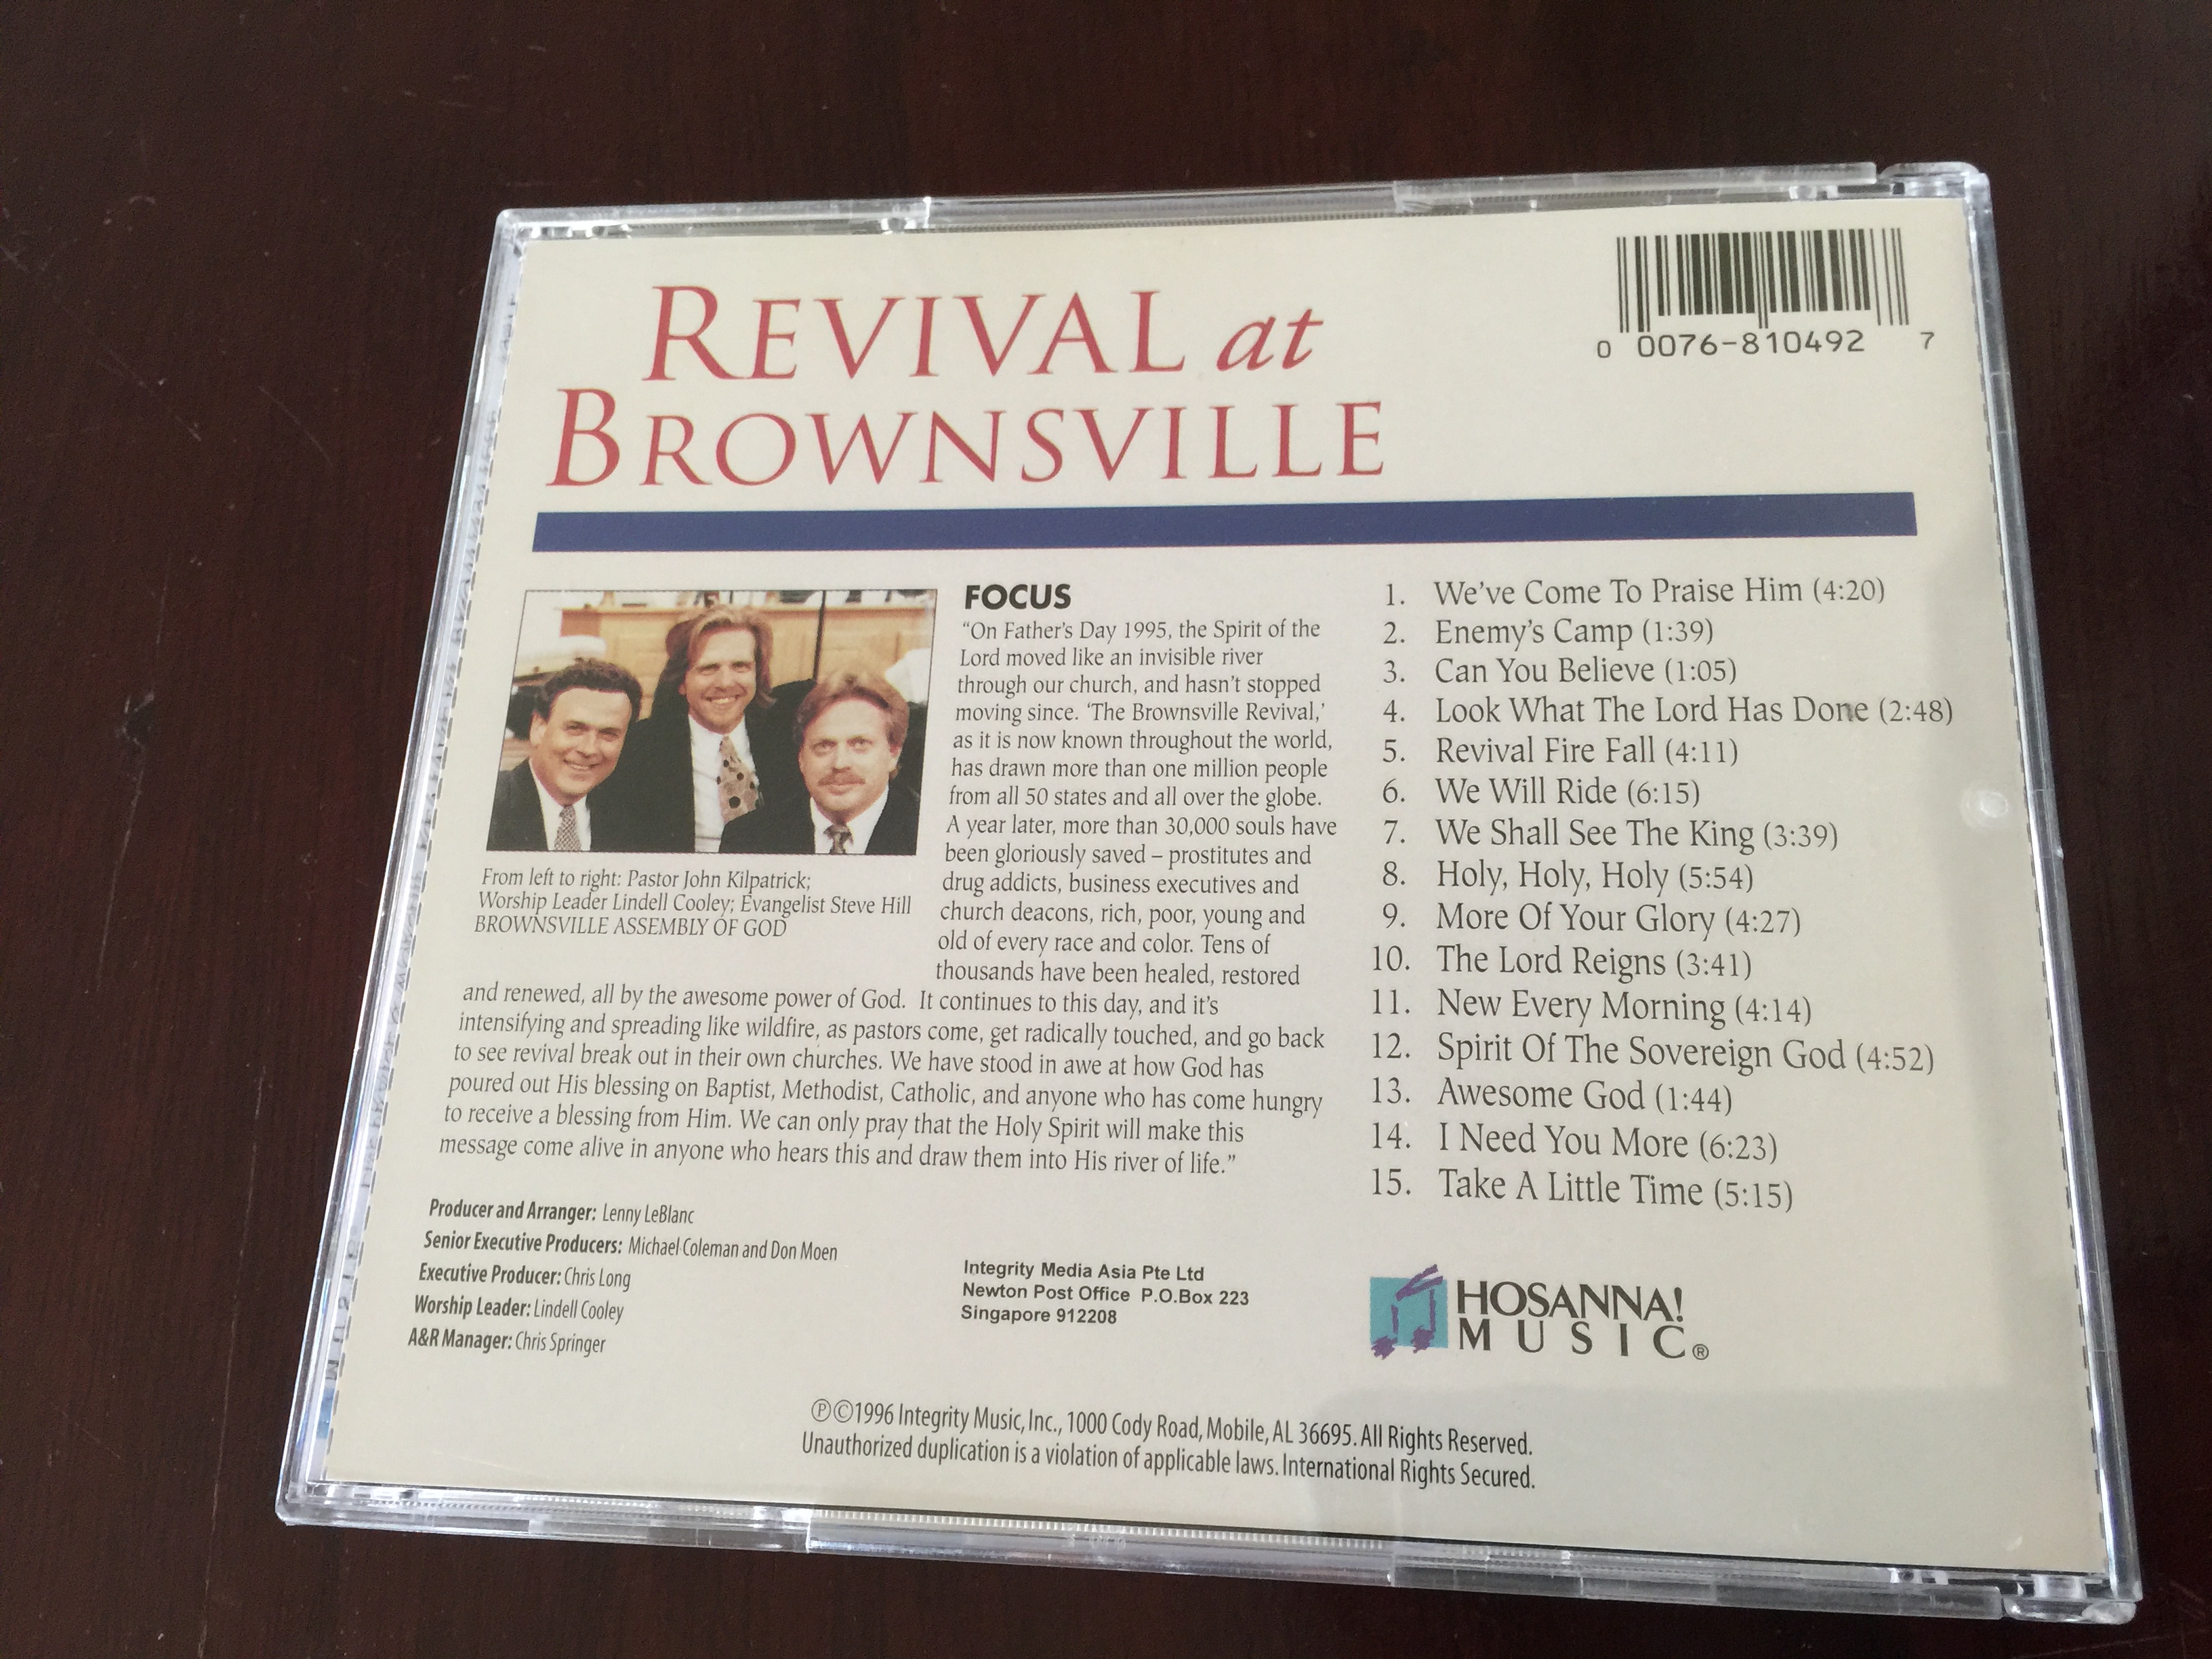 Revival at Brownsville - Recorded Live in Pensacola Florida 1